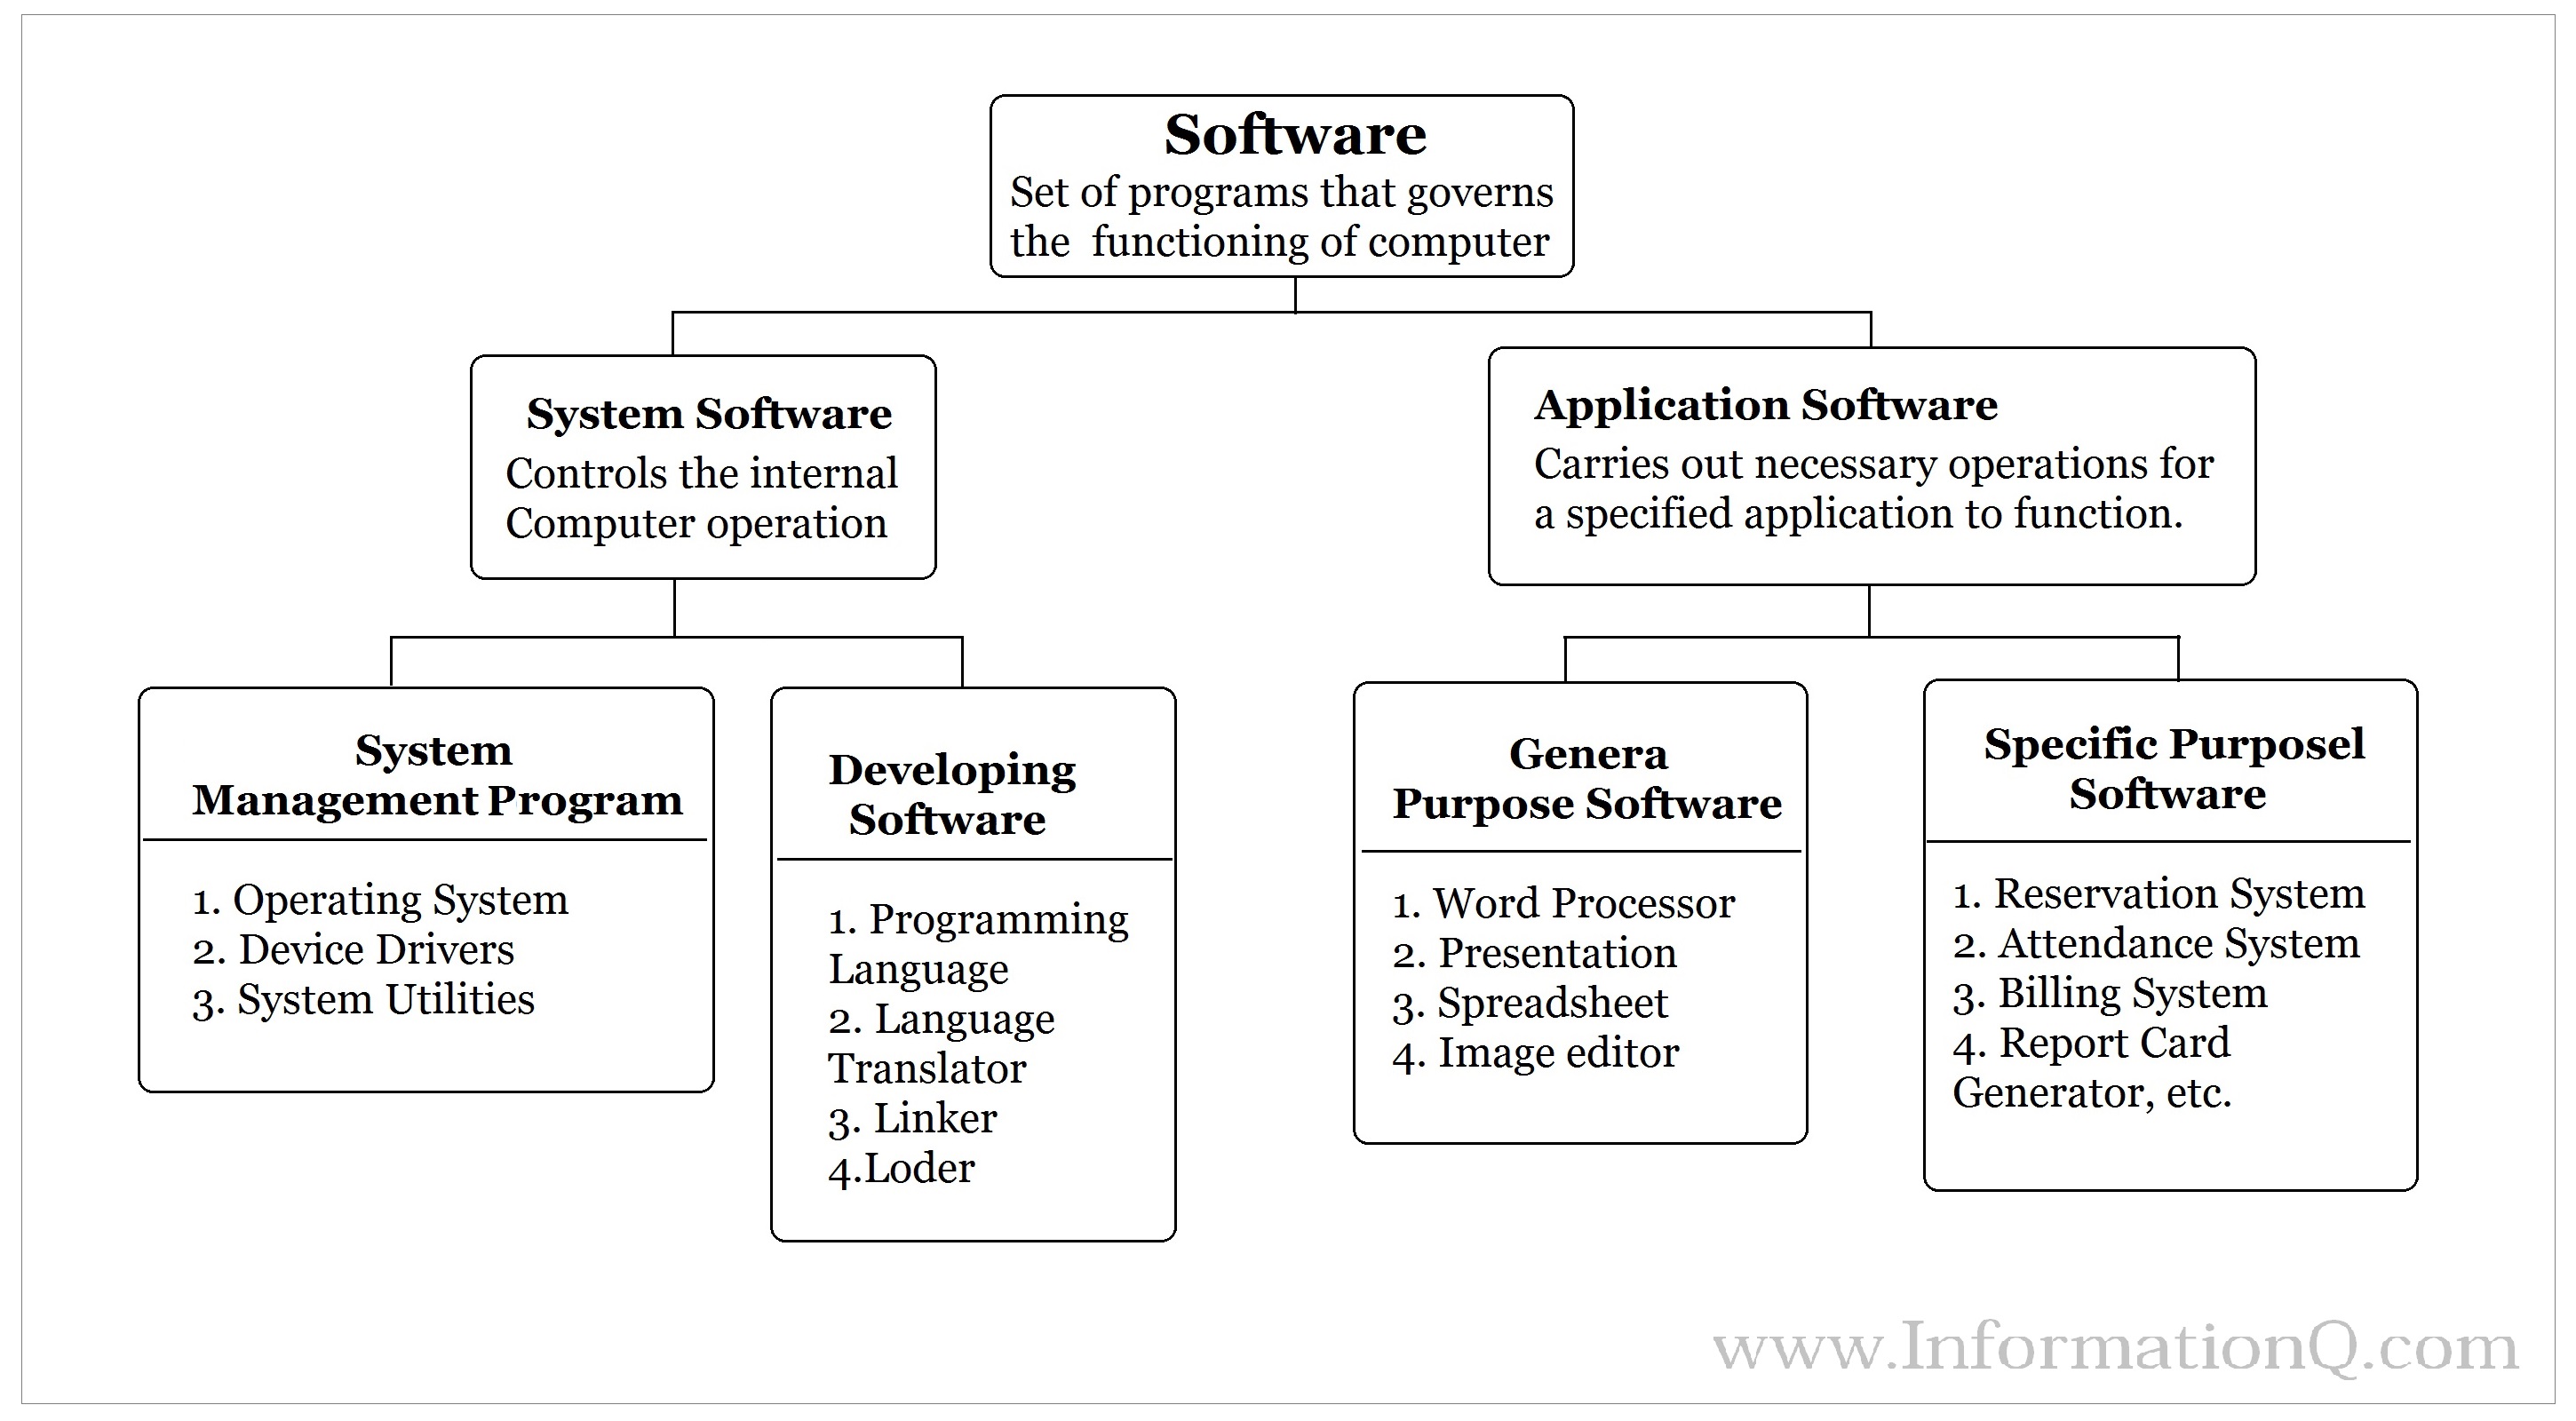 Computer Software - Types of Software